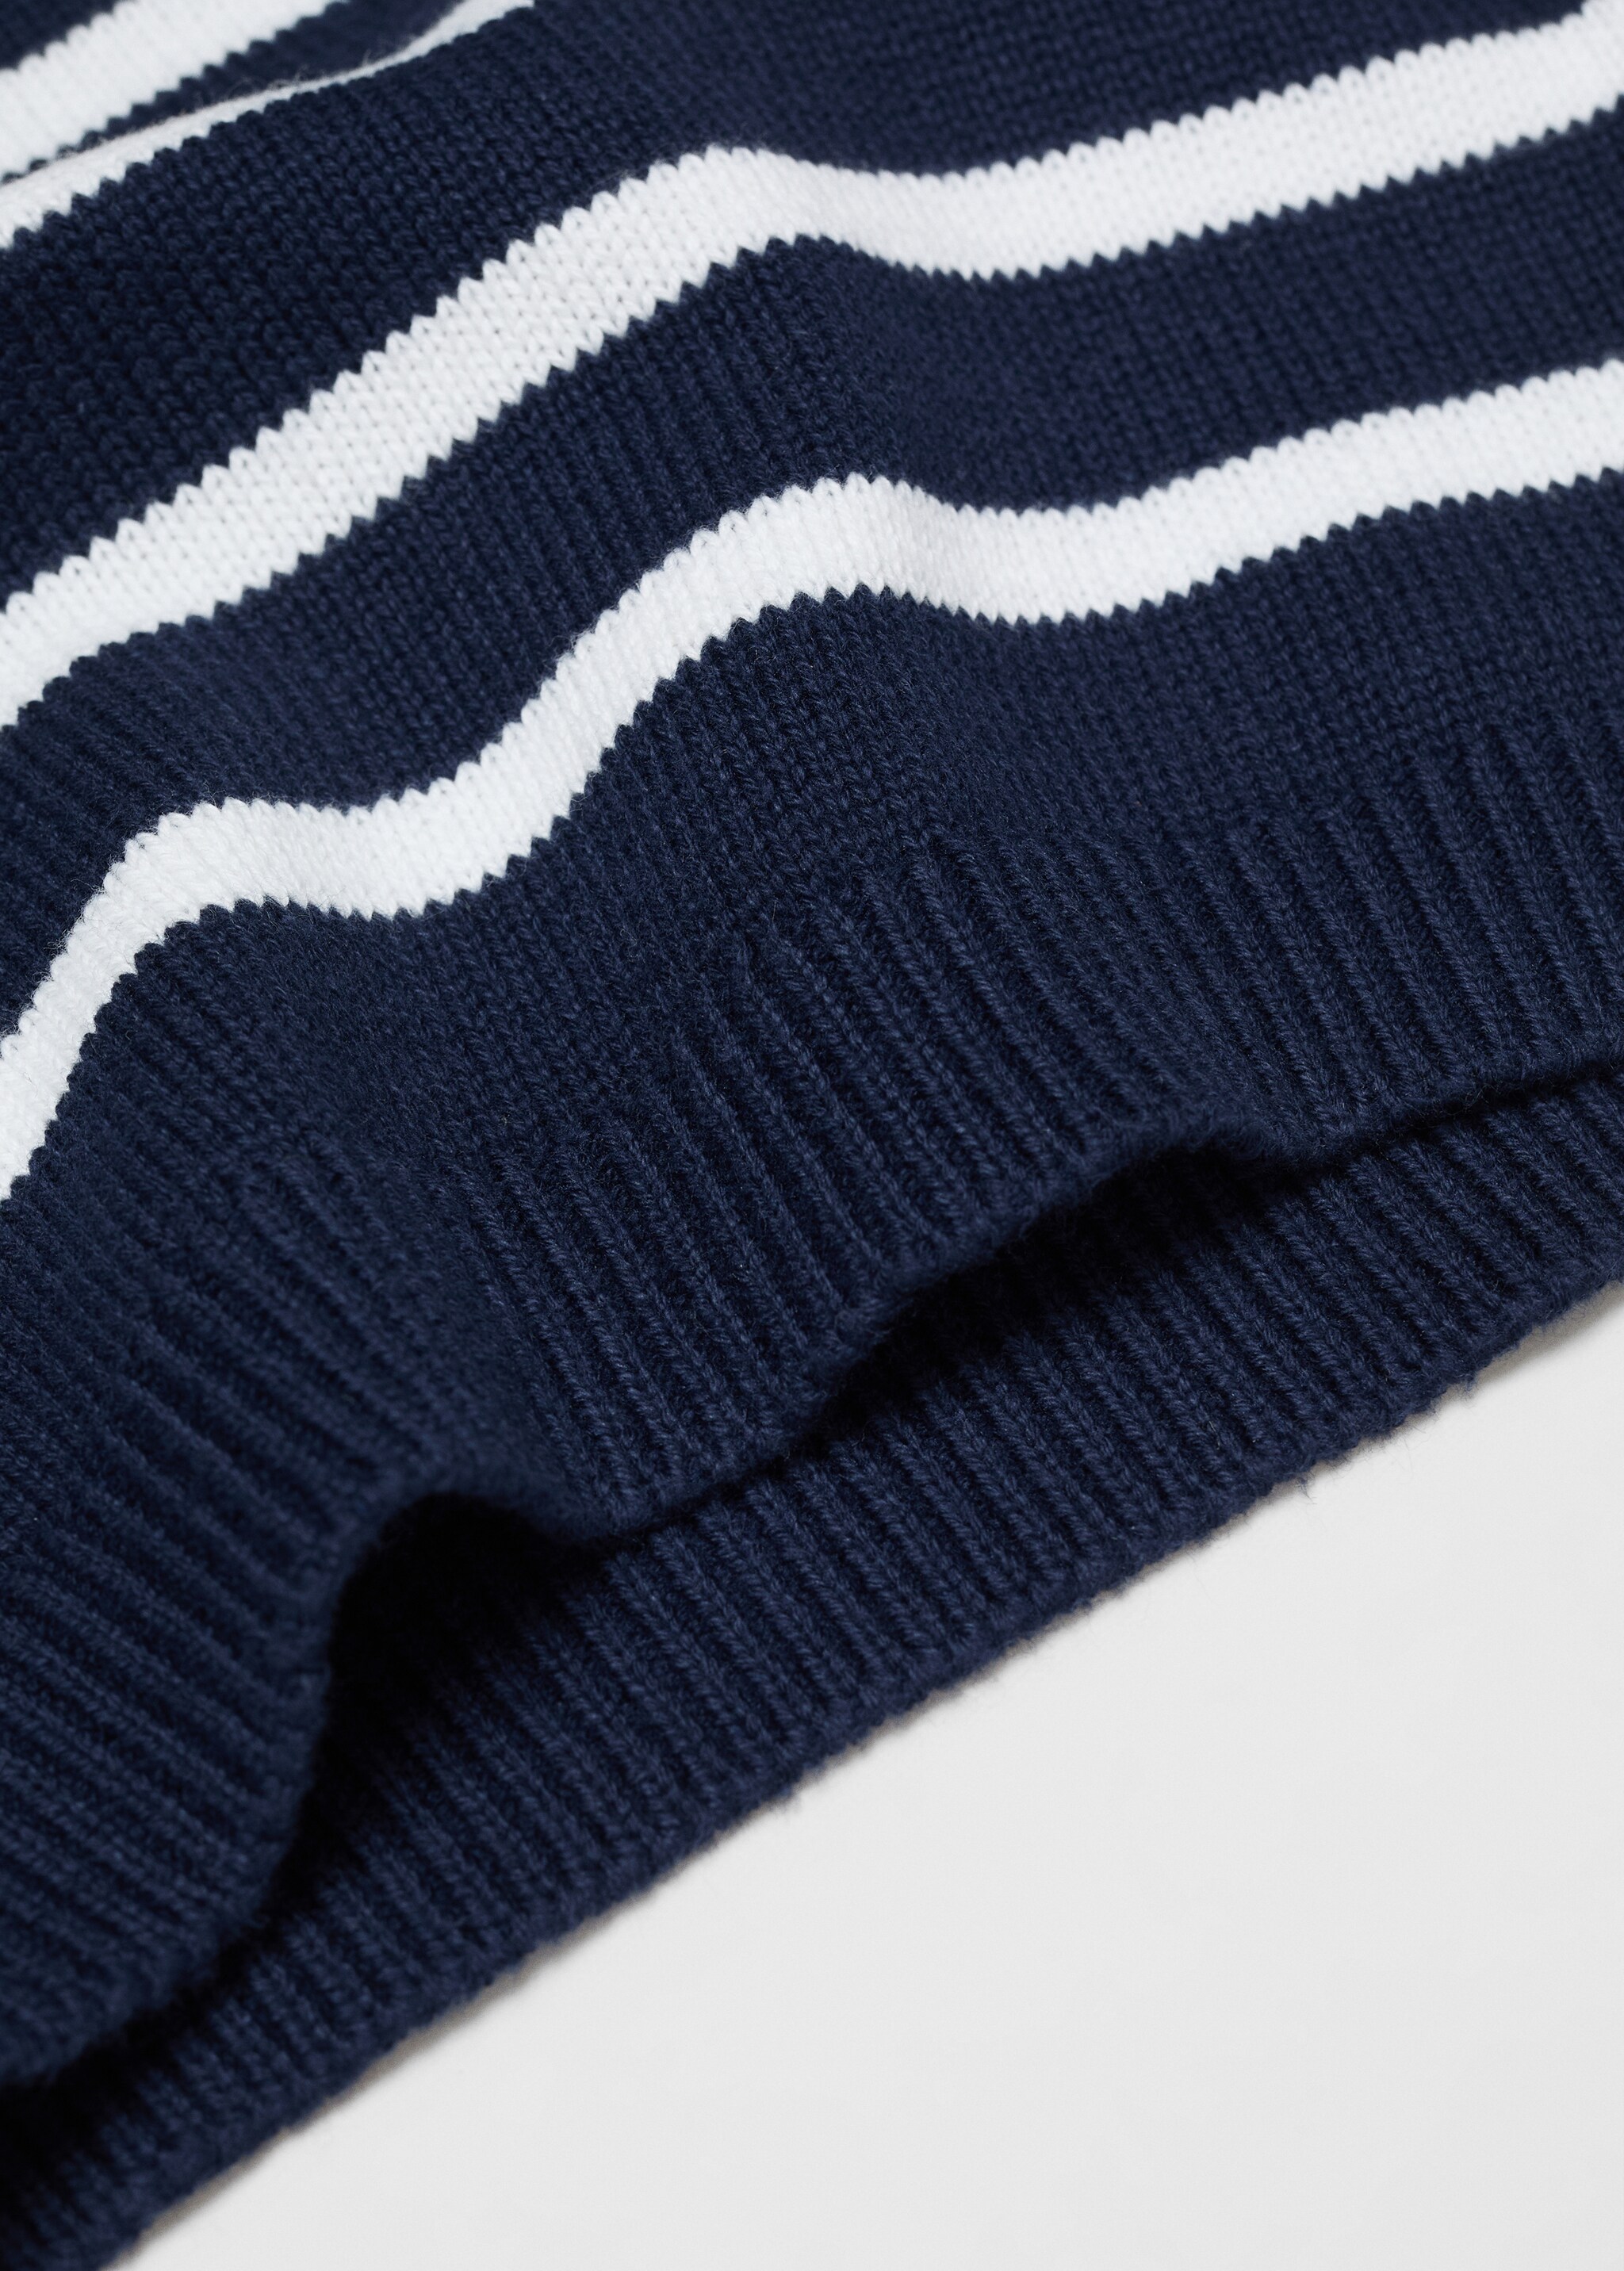 Striped knit sweater - Details of the article 0